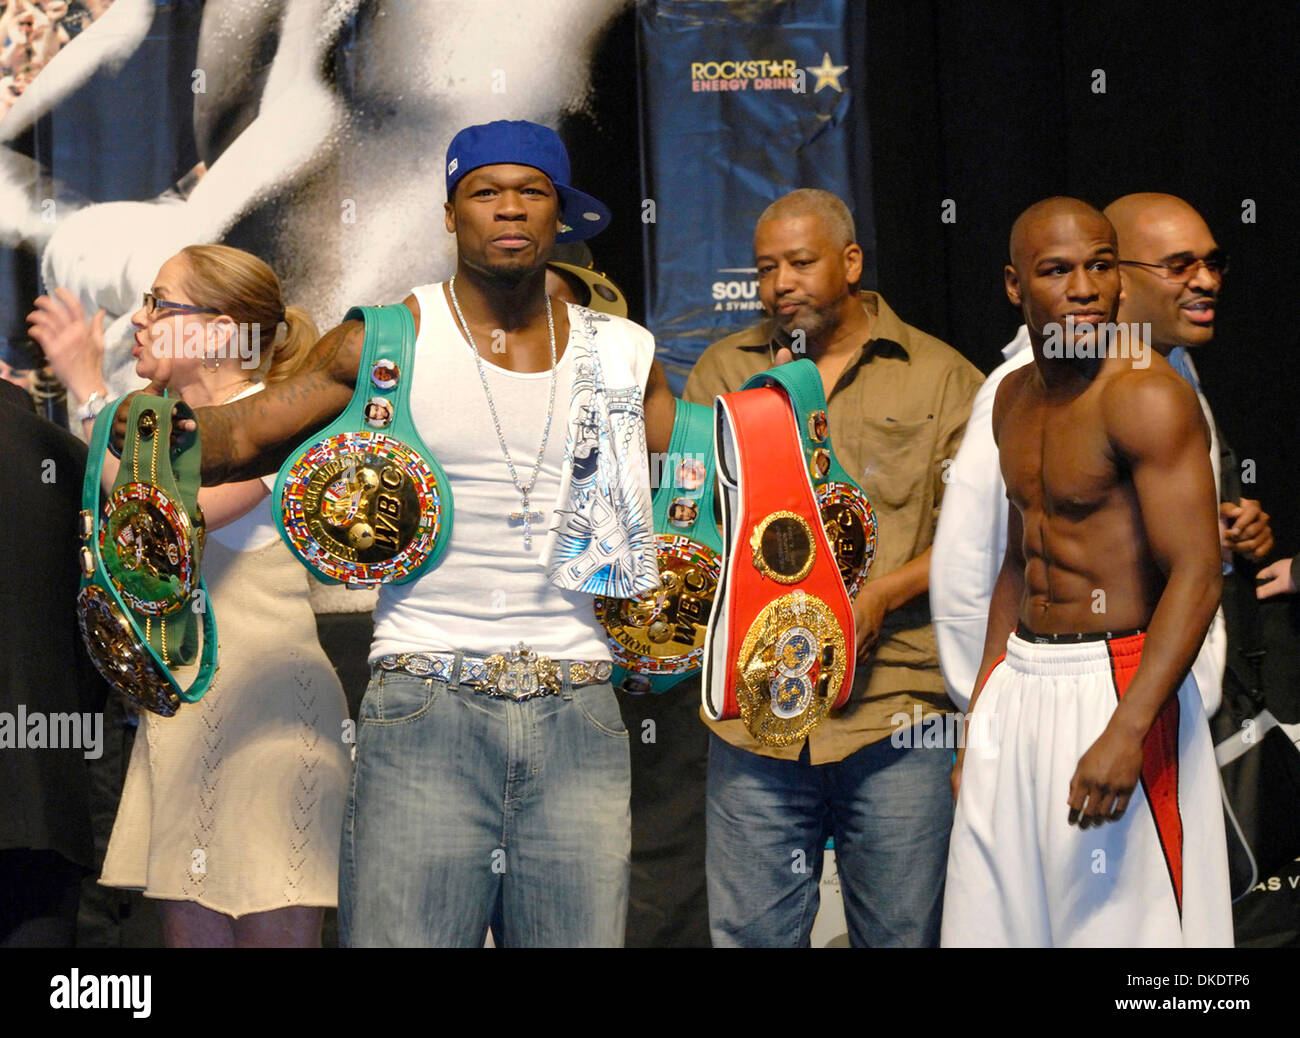 LoL Floyd Mayweather picture turned into 50 cents Louis Vuitton